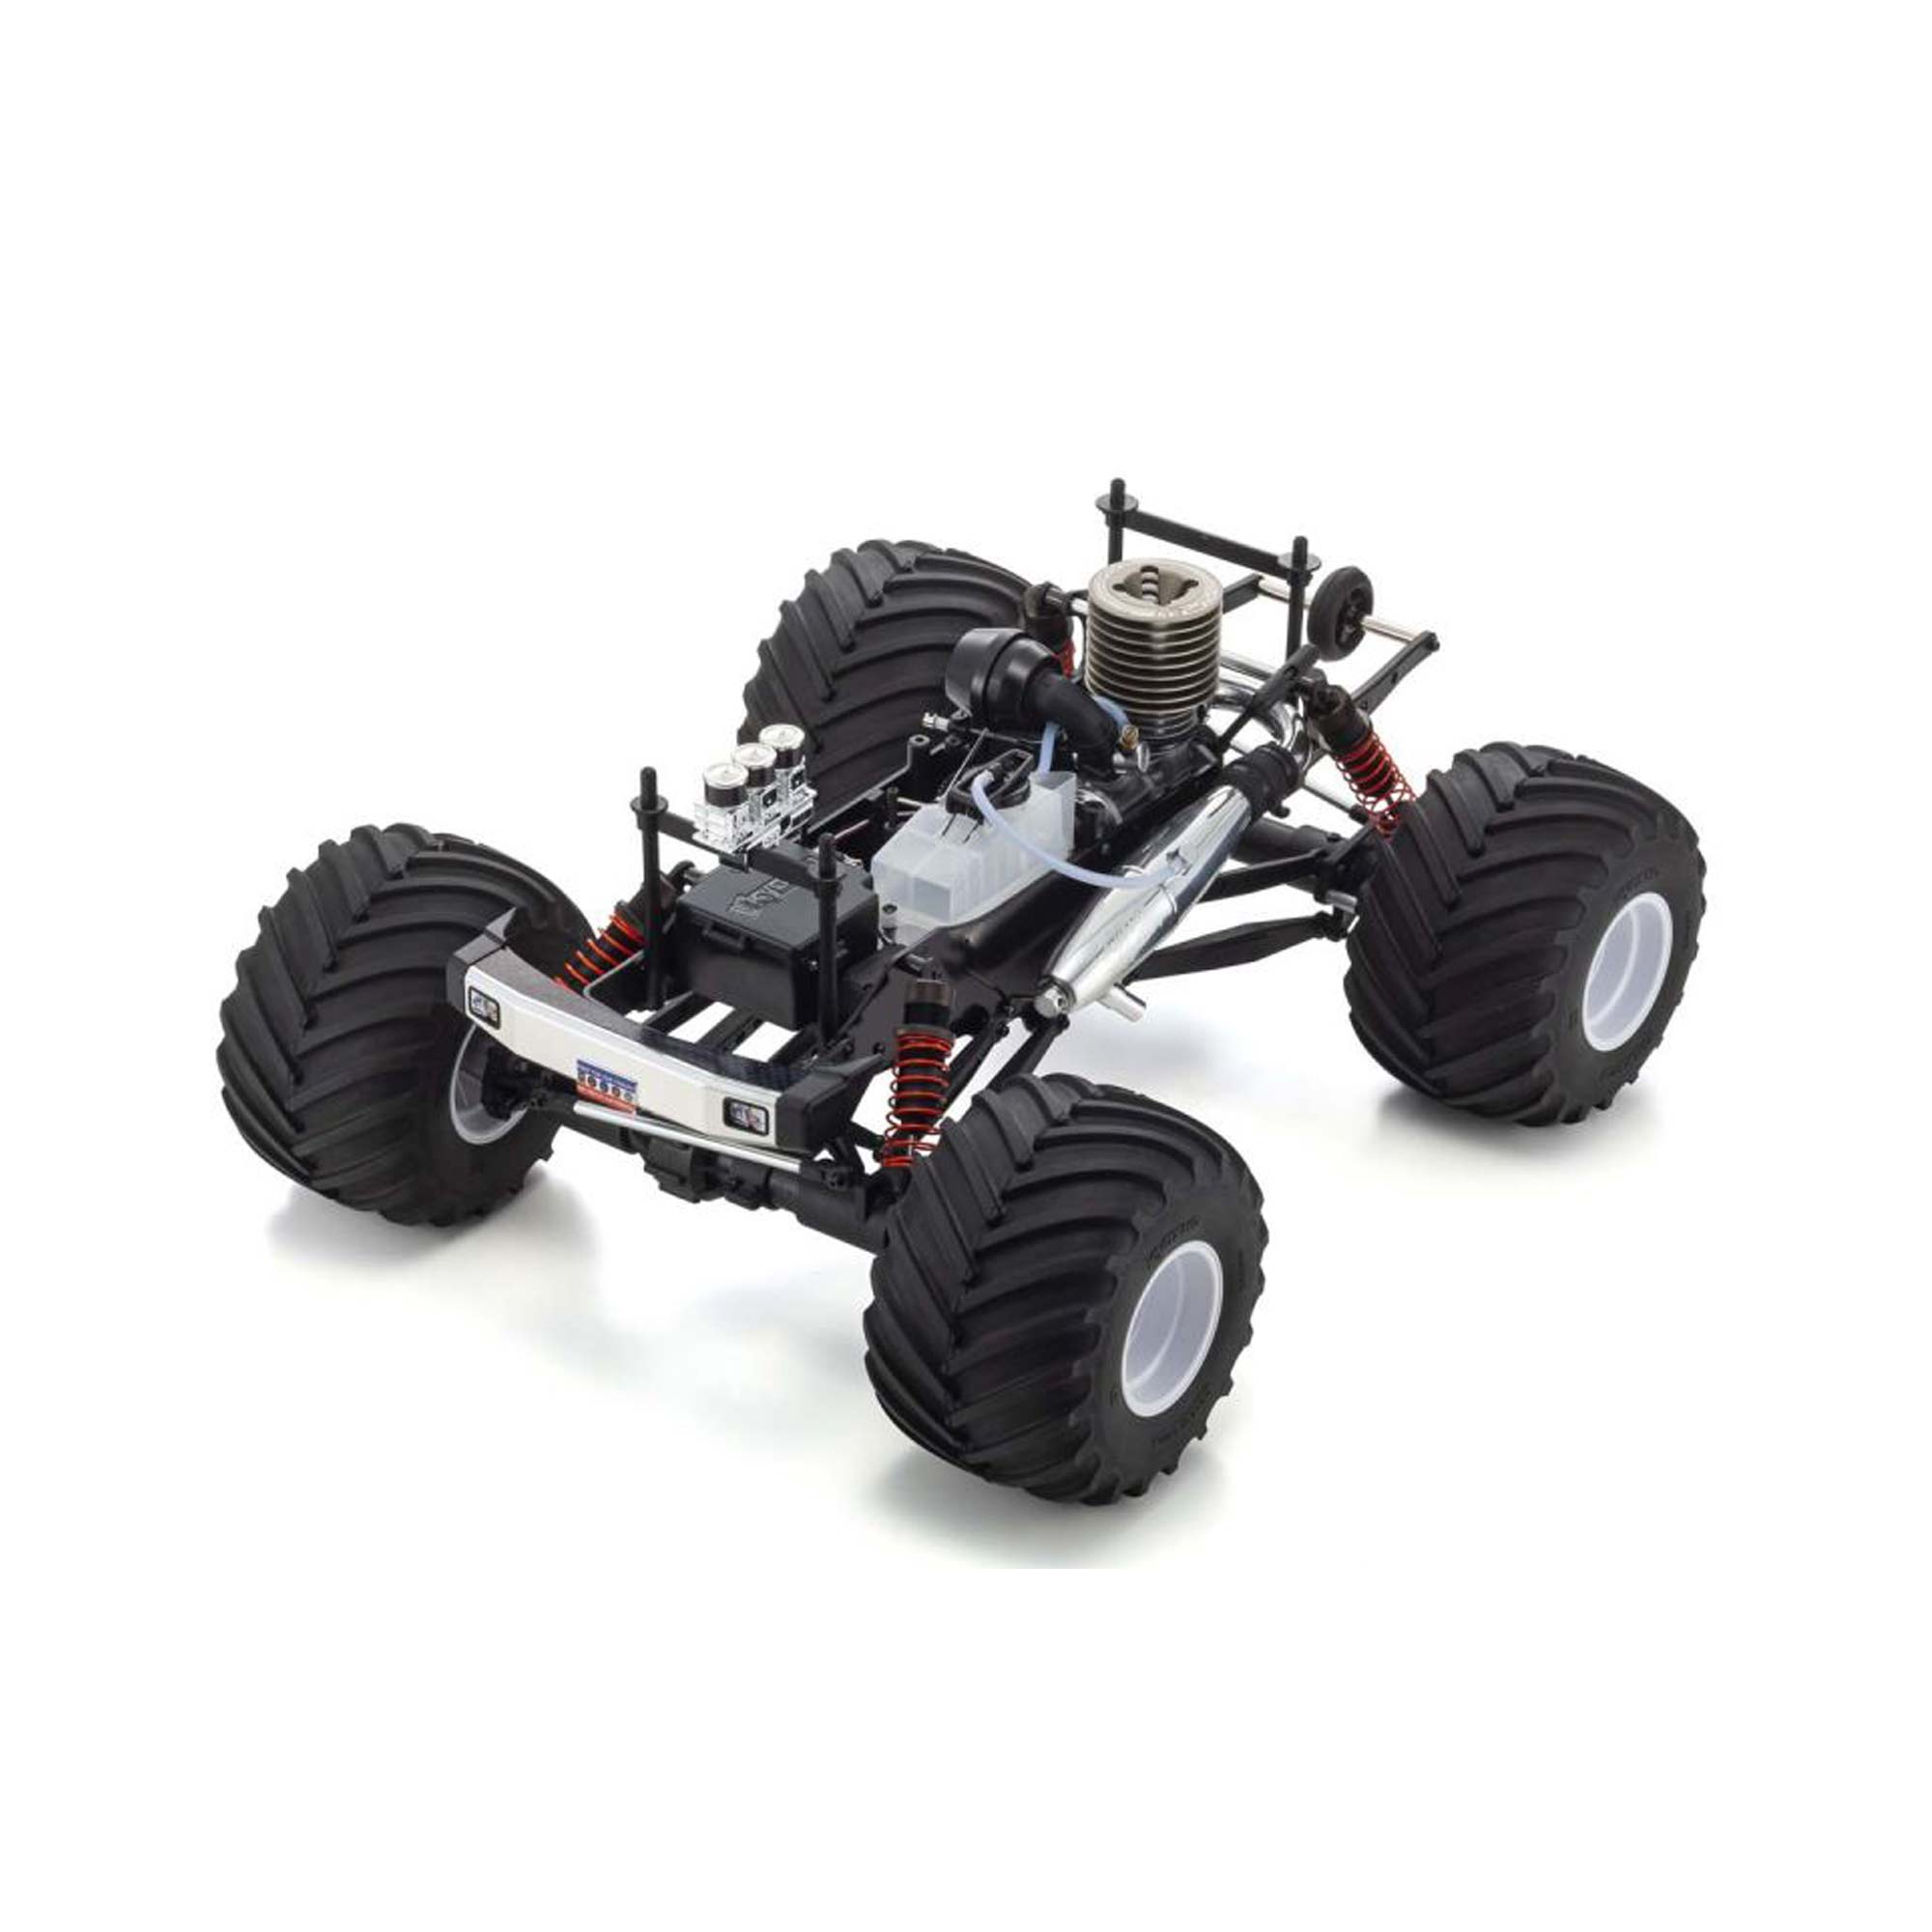 Kyosho 1/8 USA-1 4WD .25 Nitro Monster Truck RTR | Tower Hobbies